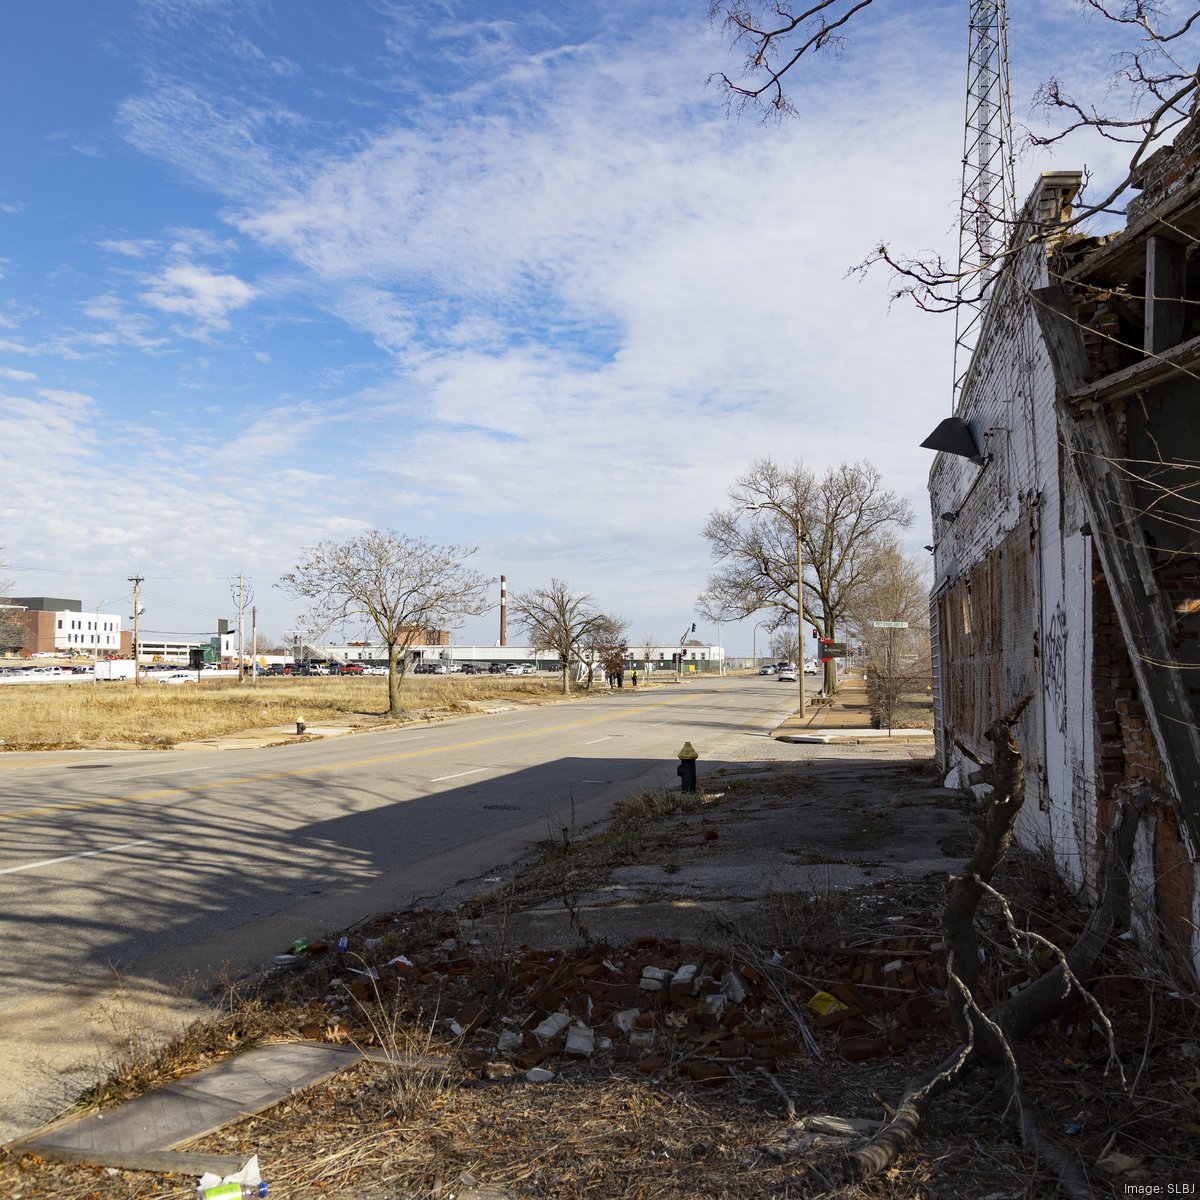 Once a major American city, St. Louis struggles to redefine itself.